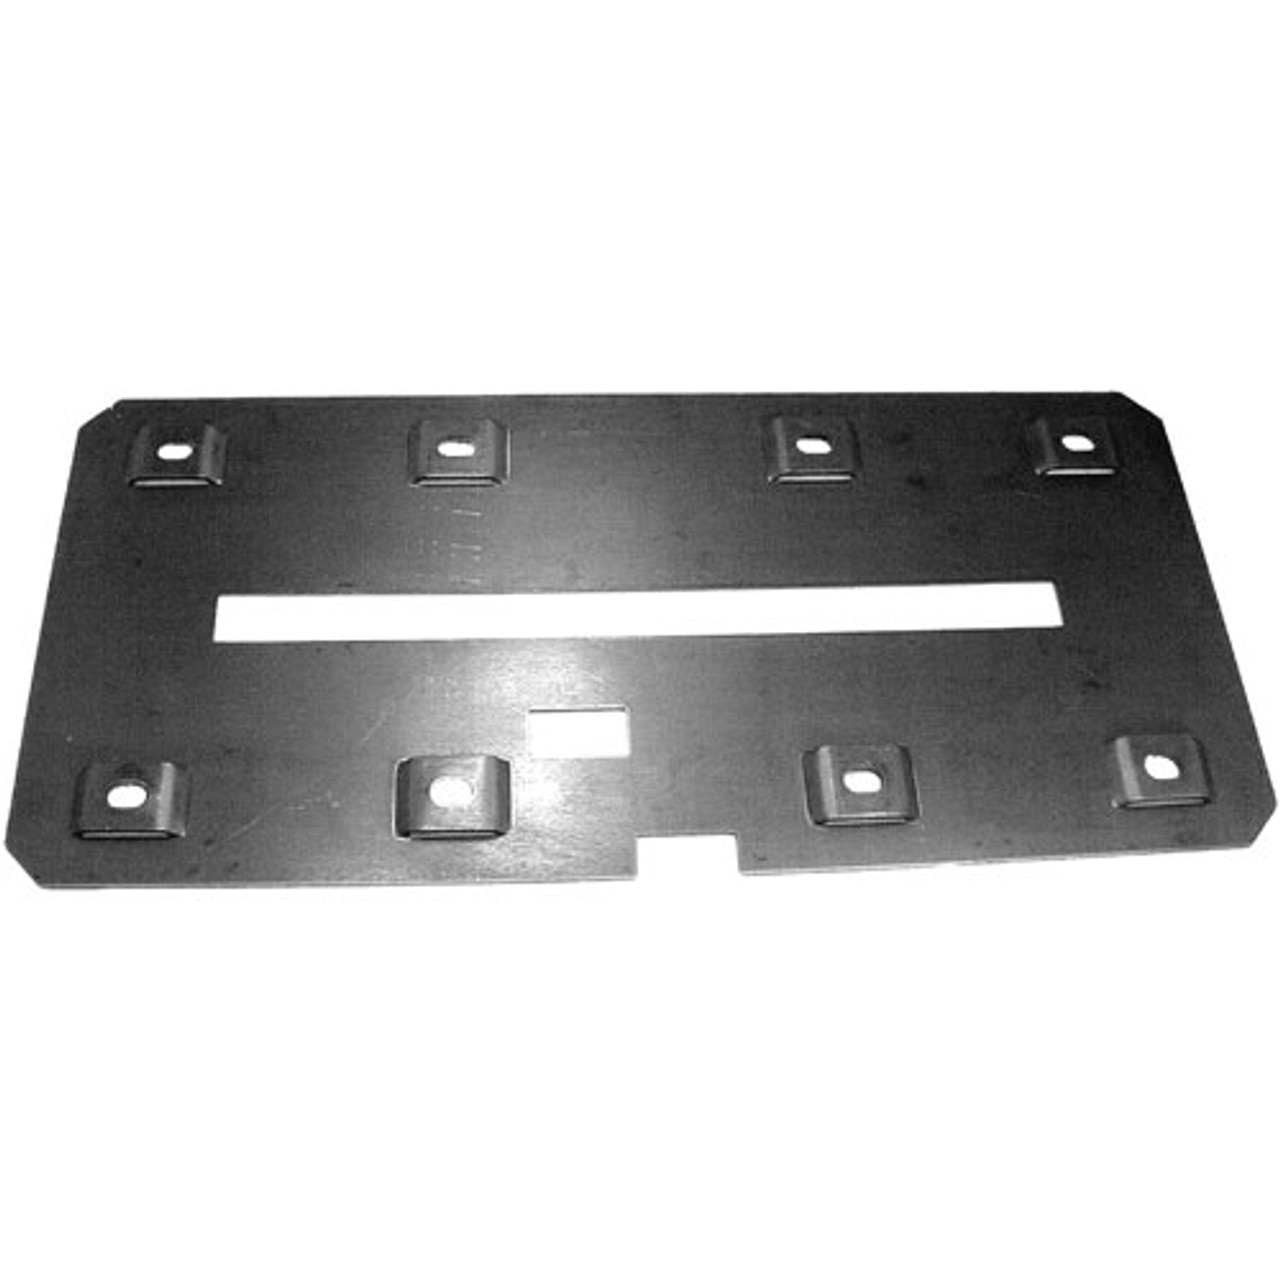 Pressure Plate - Replacement Part For Hobart 00-342212-1